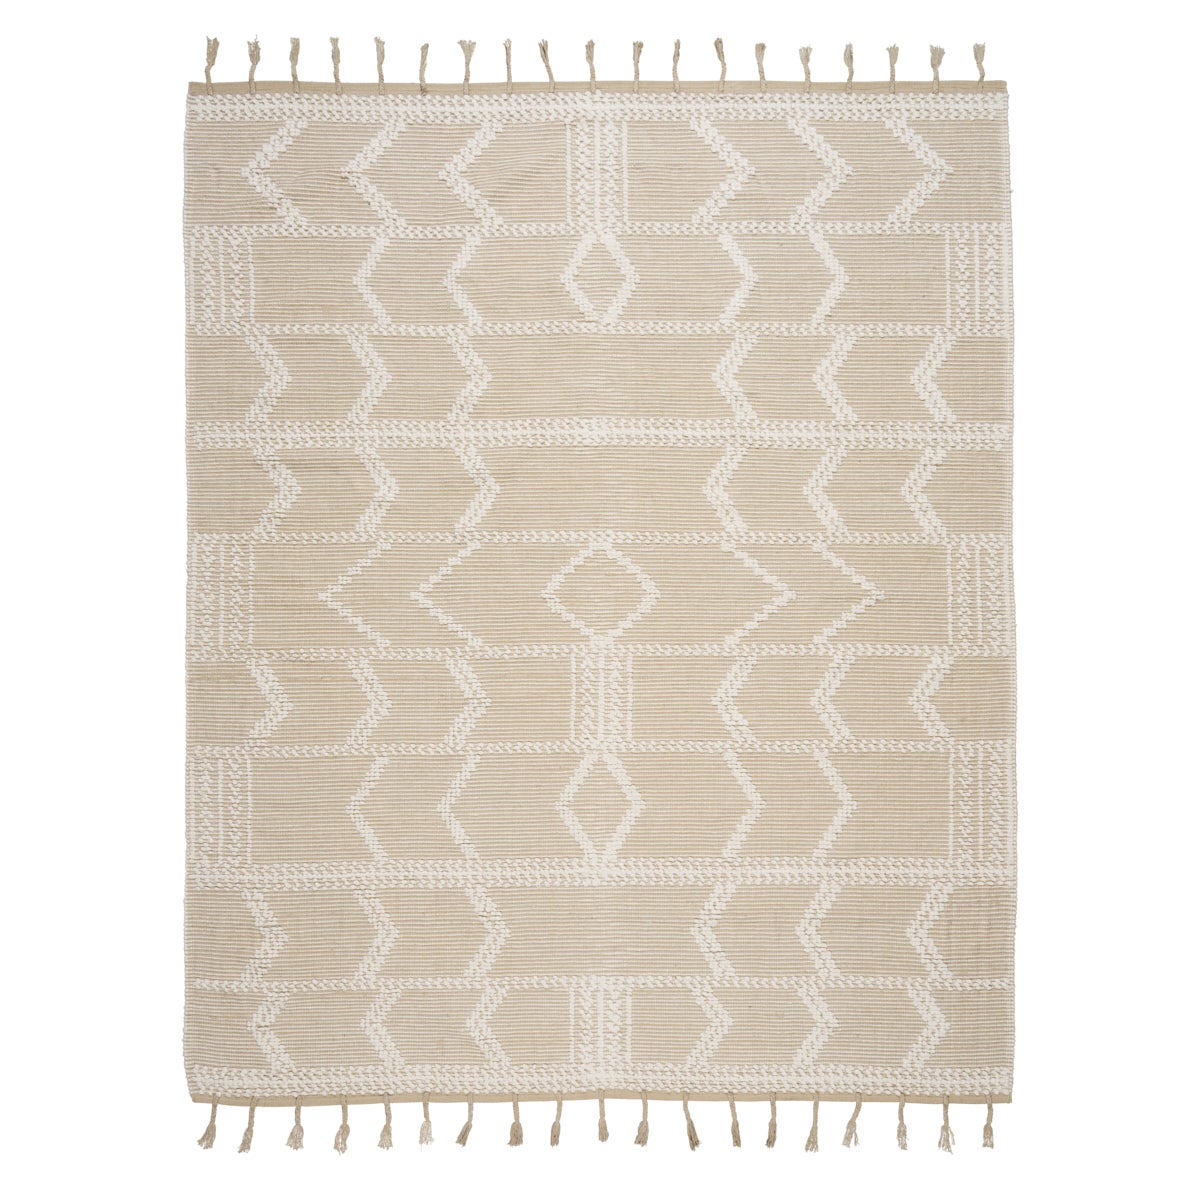 Malta French Knot Rug in Sand, 8x10'